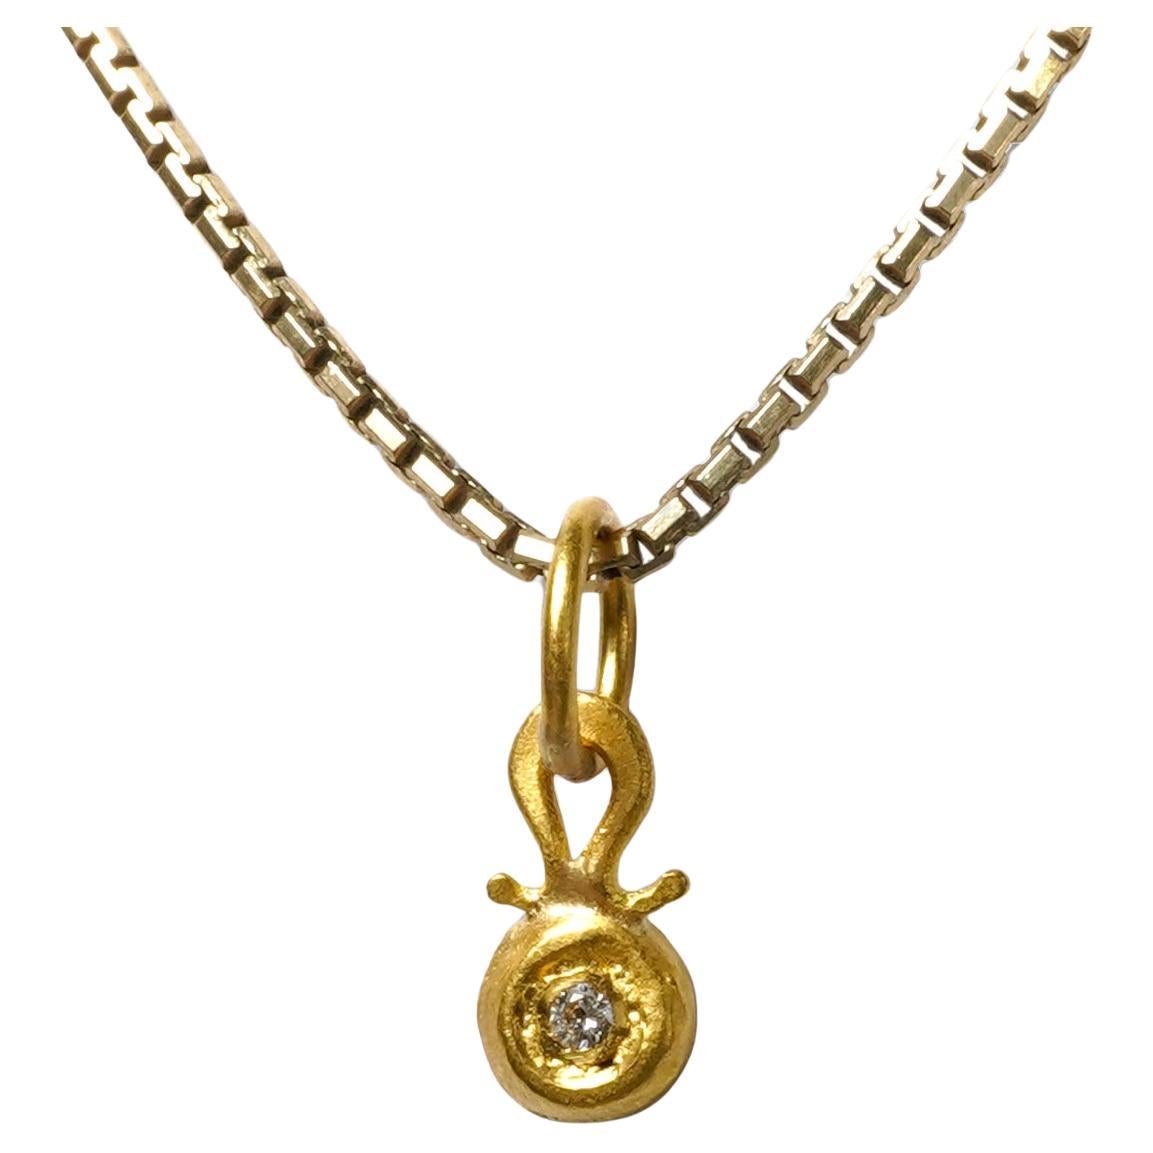 Miniature, 24K Gold and Diamond Layering Charm, 24K Yellow Gold and 0.03ct Diamo For Sale